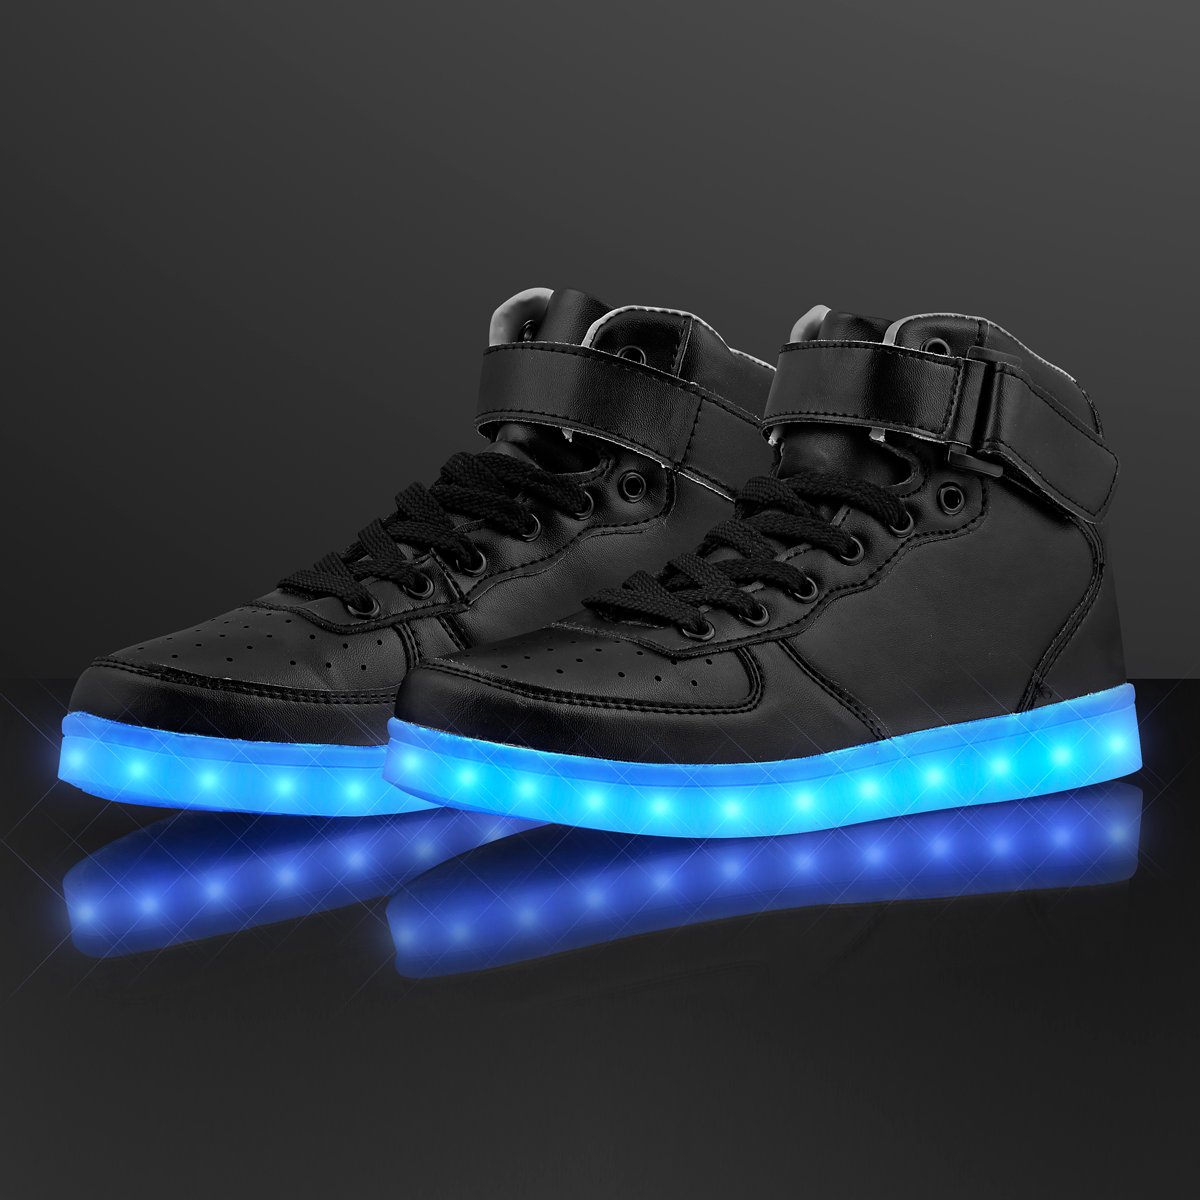 MonkeyJack Unisex Adults LED Light Up Shoes High Top Luminous Casual Sneakers 